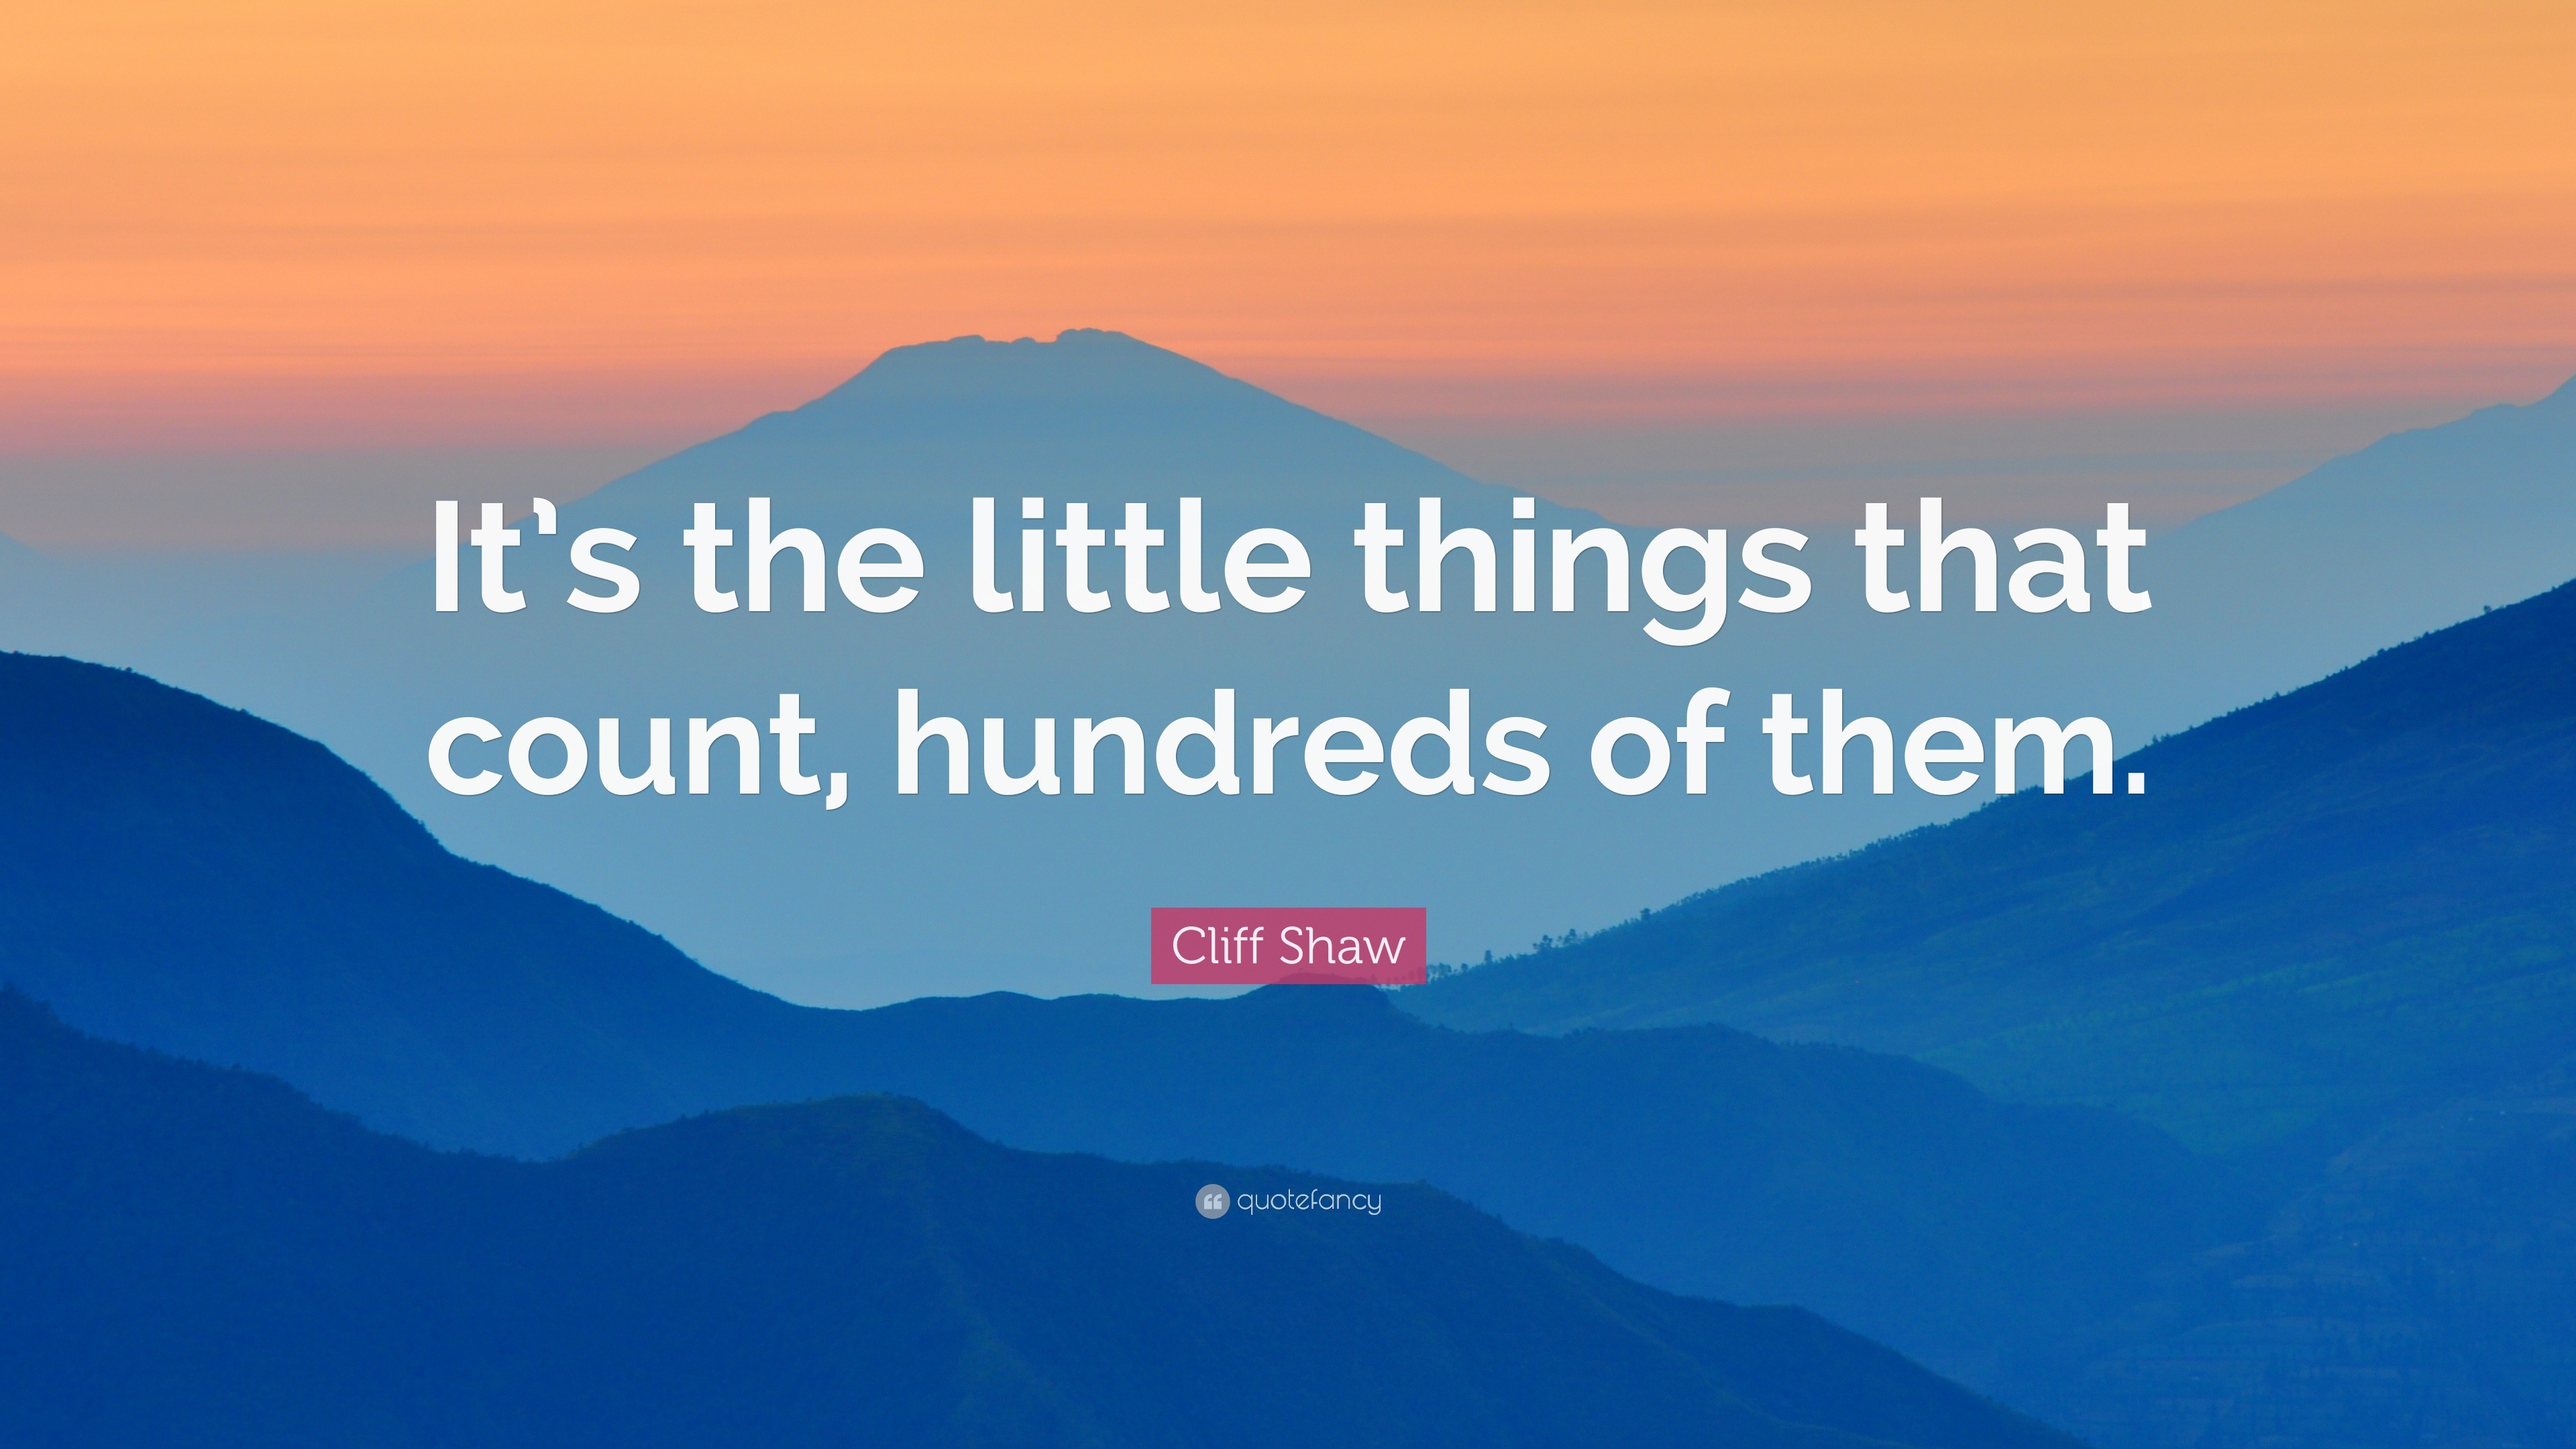 Cliff Shaw - It's the little things that count, hundreds